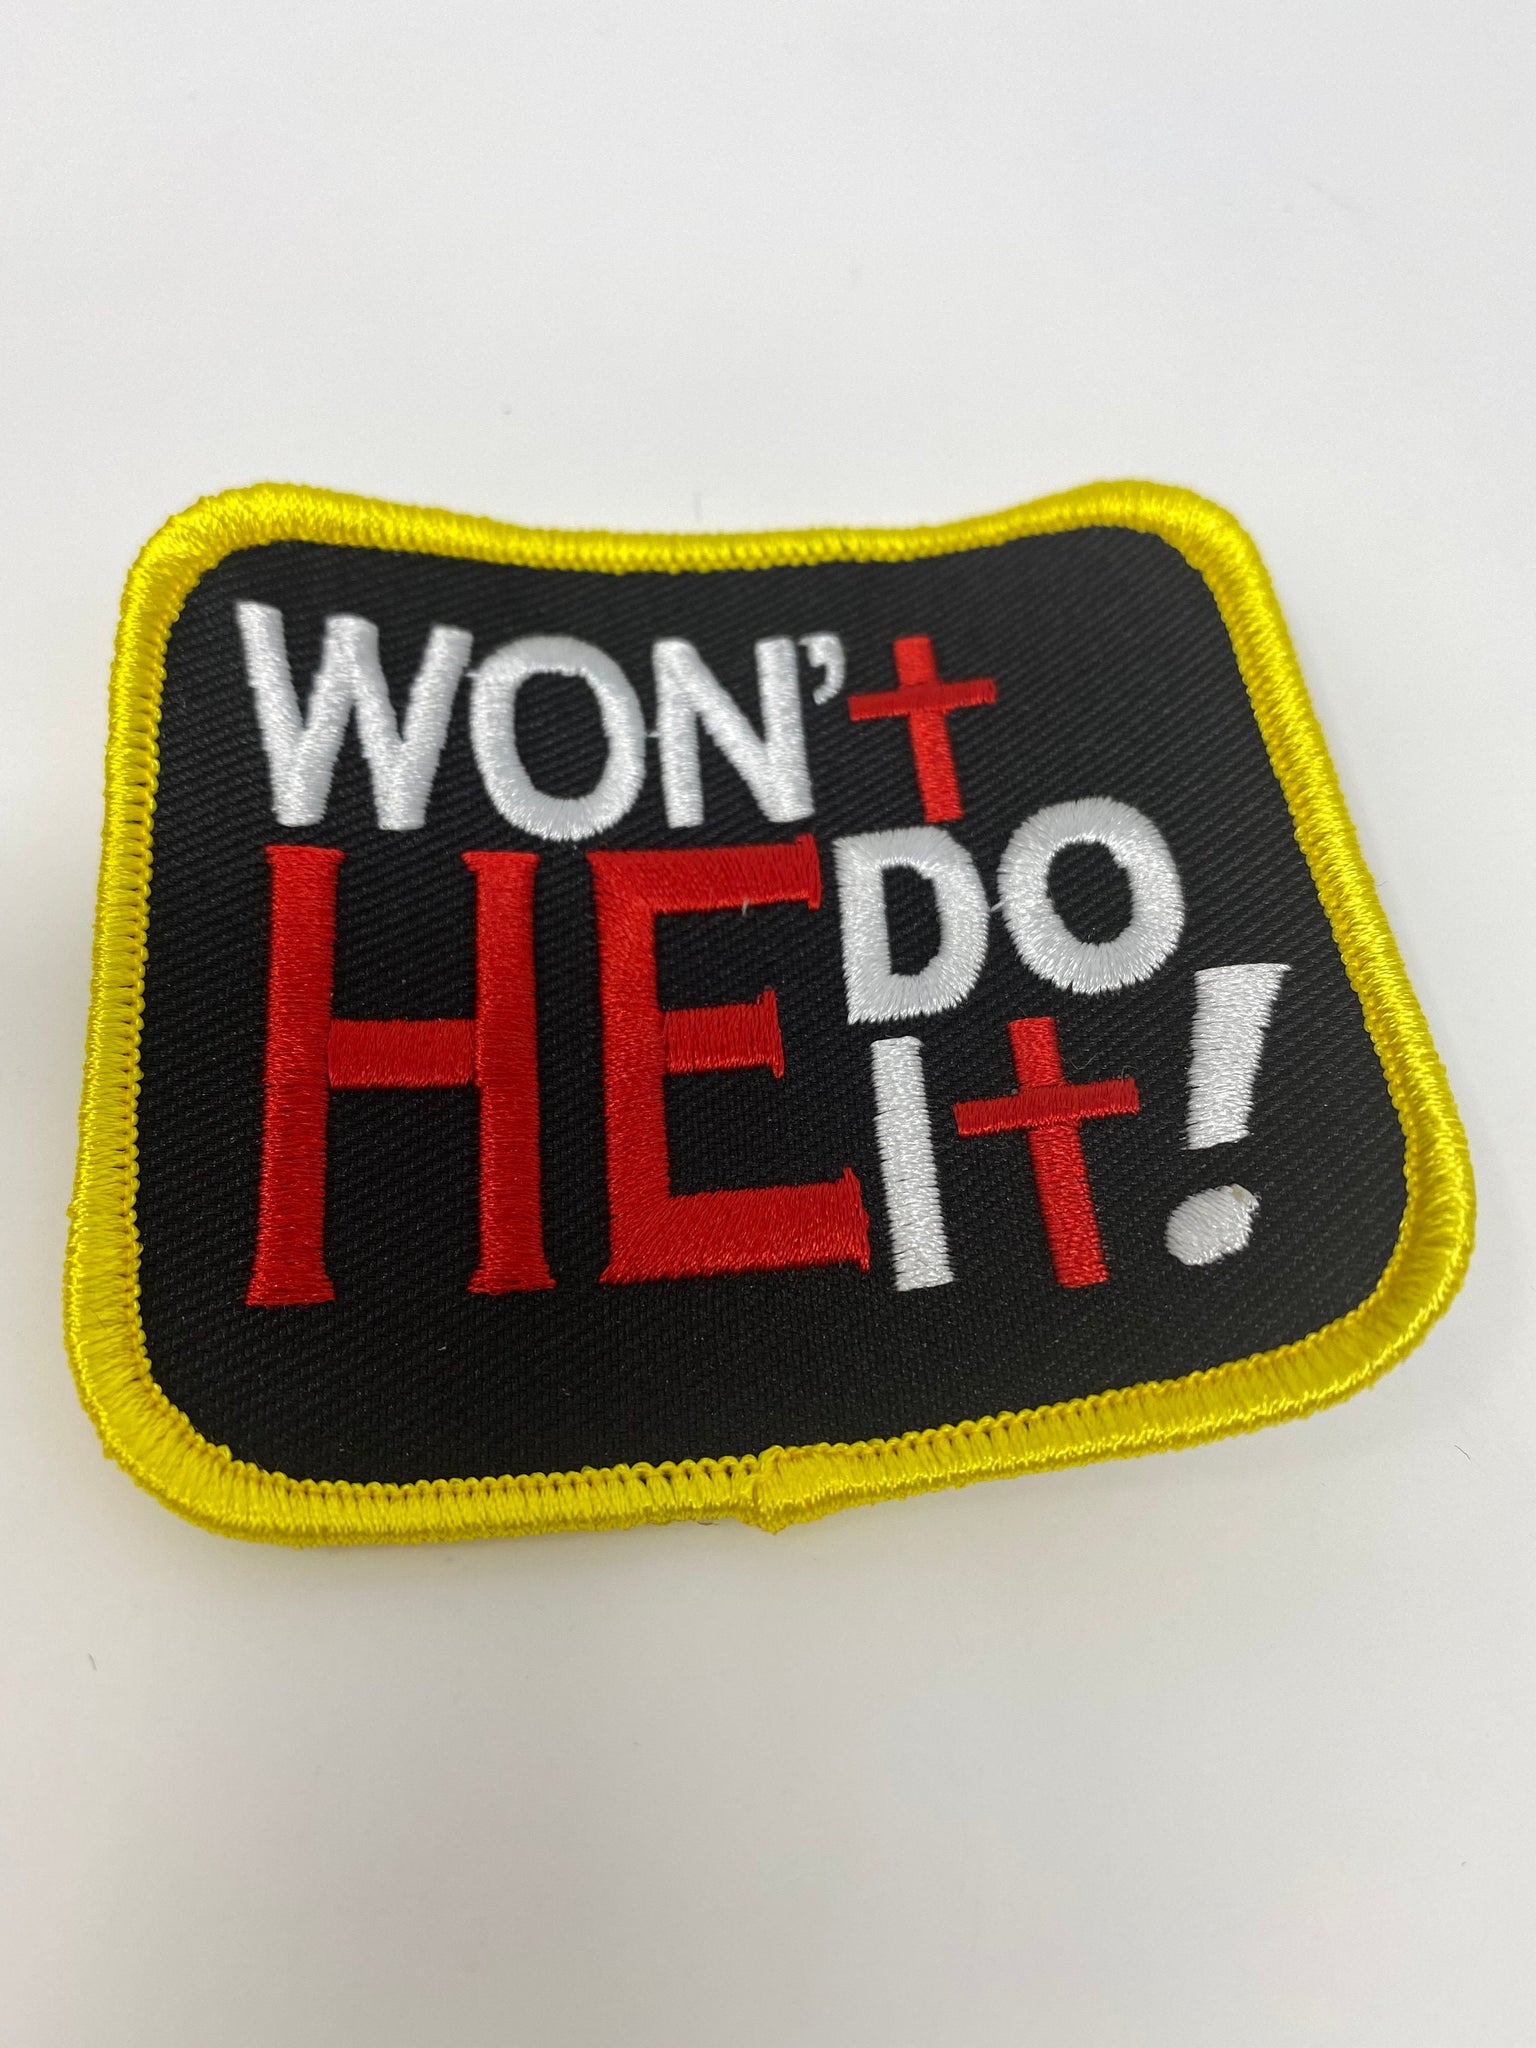 New Arrival, "Won't He Do It!" Statement Patch, Iron-on Embroidered Patch Badge, Cool Patches, DIY, Jacket Patch, 3", Small, Colorful Patch